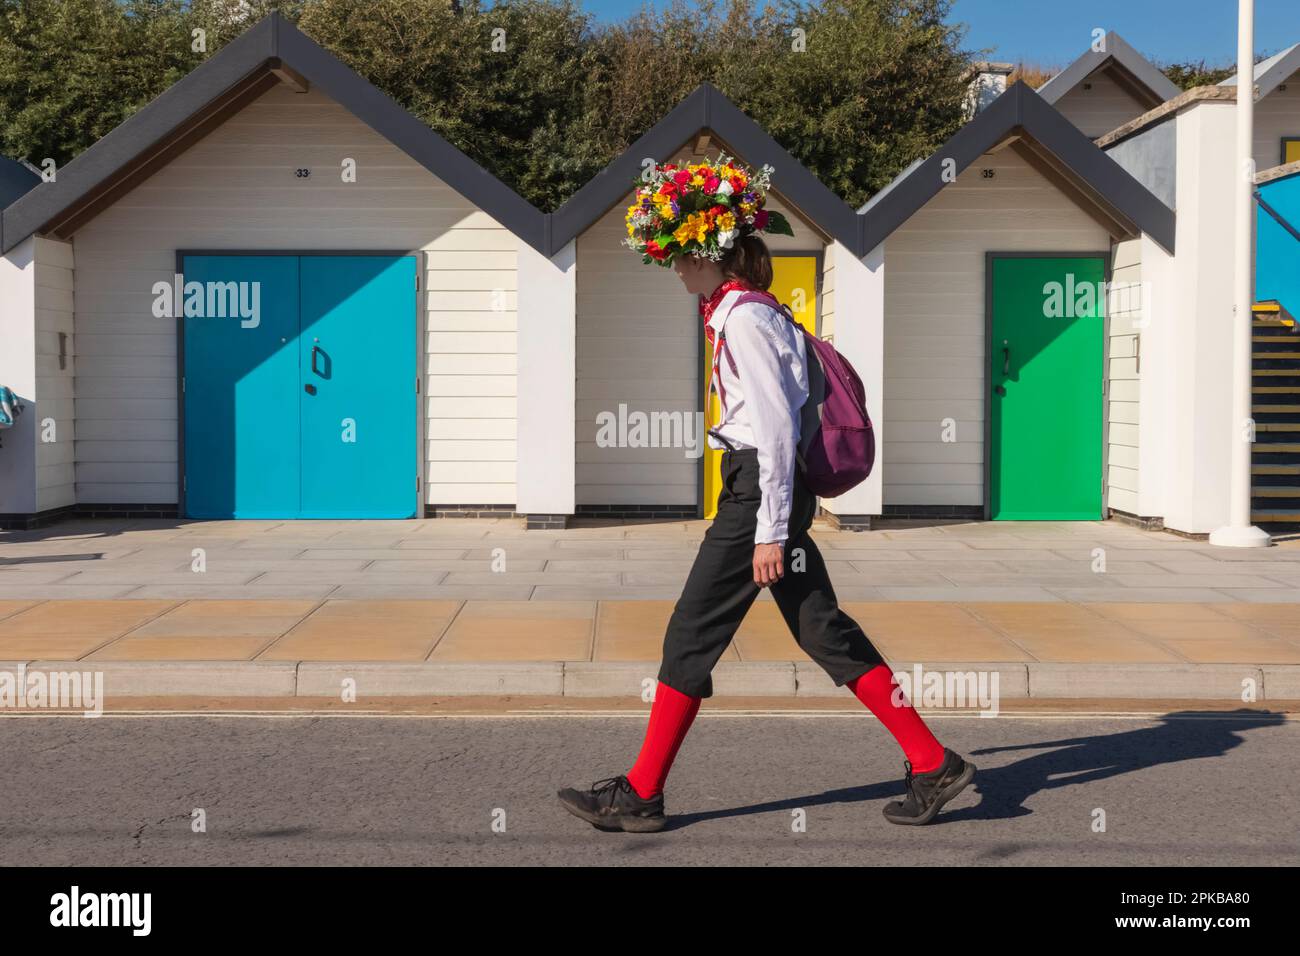 England, Dorset, Isle of Purbeck, Swanage, Swanage Folk Festival, Morris Dancer and Daughter in front of Colourful Beach Huts Stock Photo